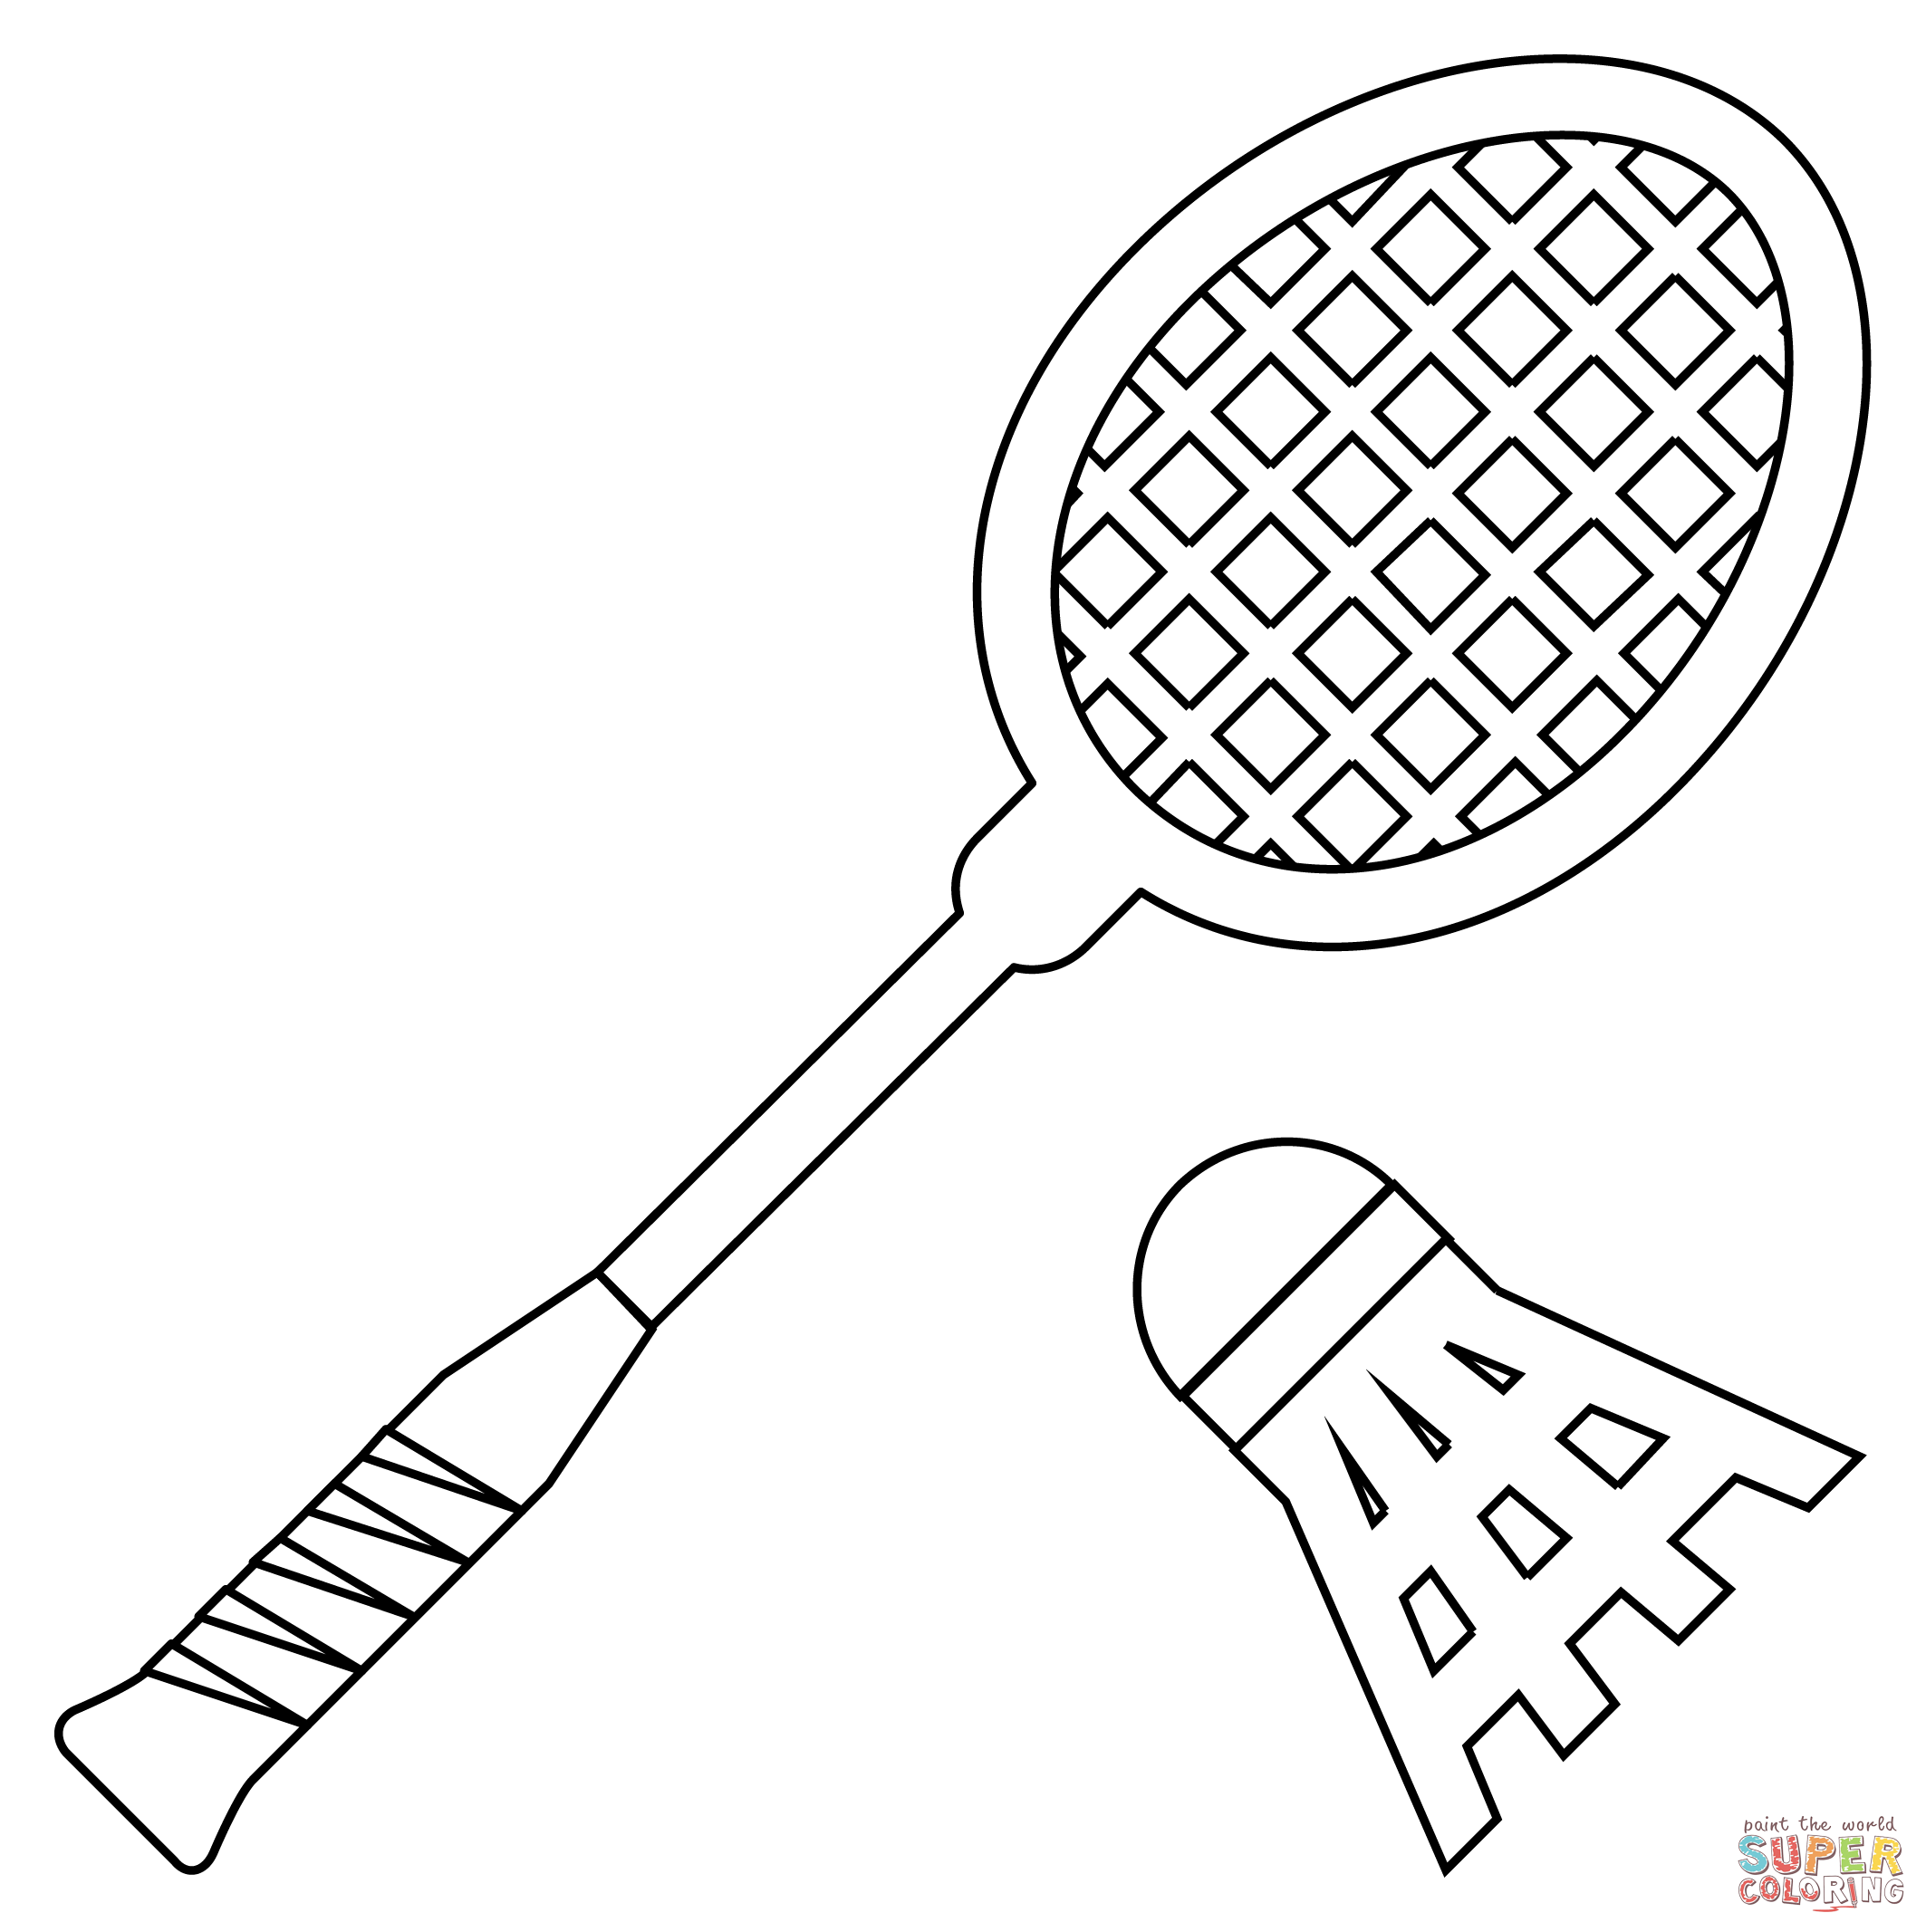 Badminton coloring page free printable coloring pages